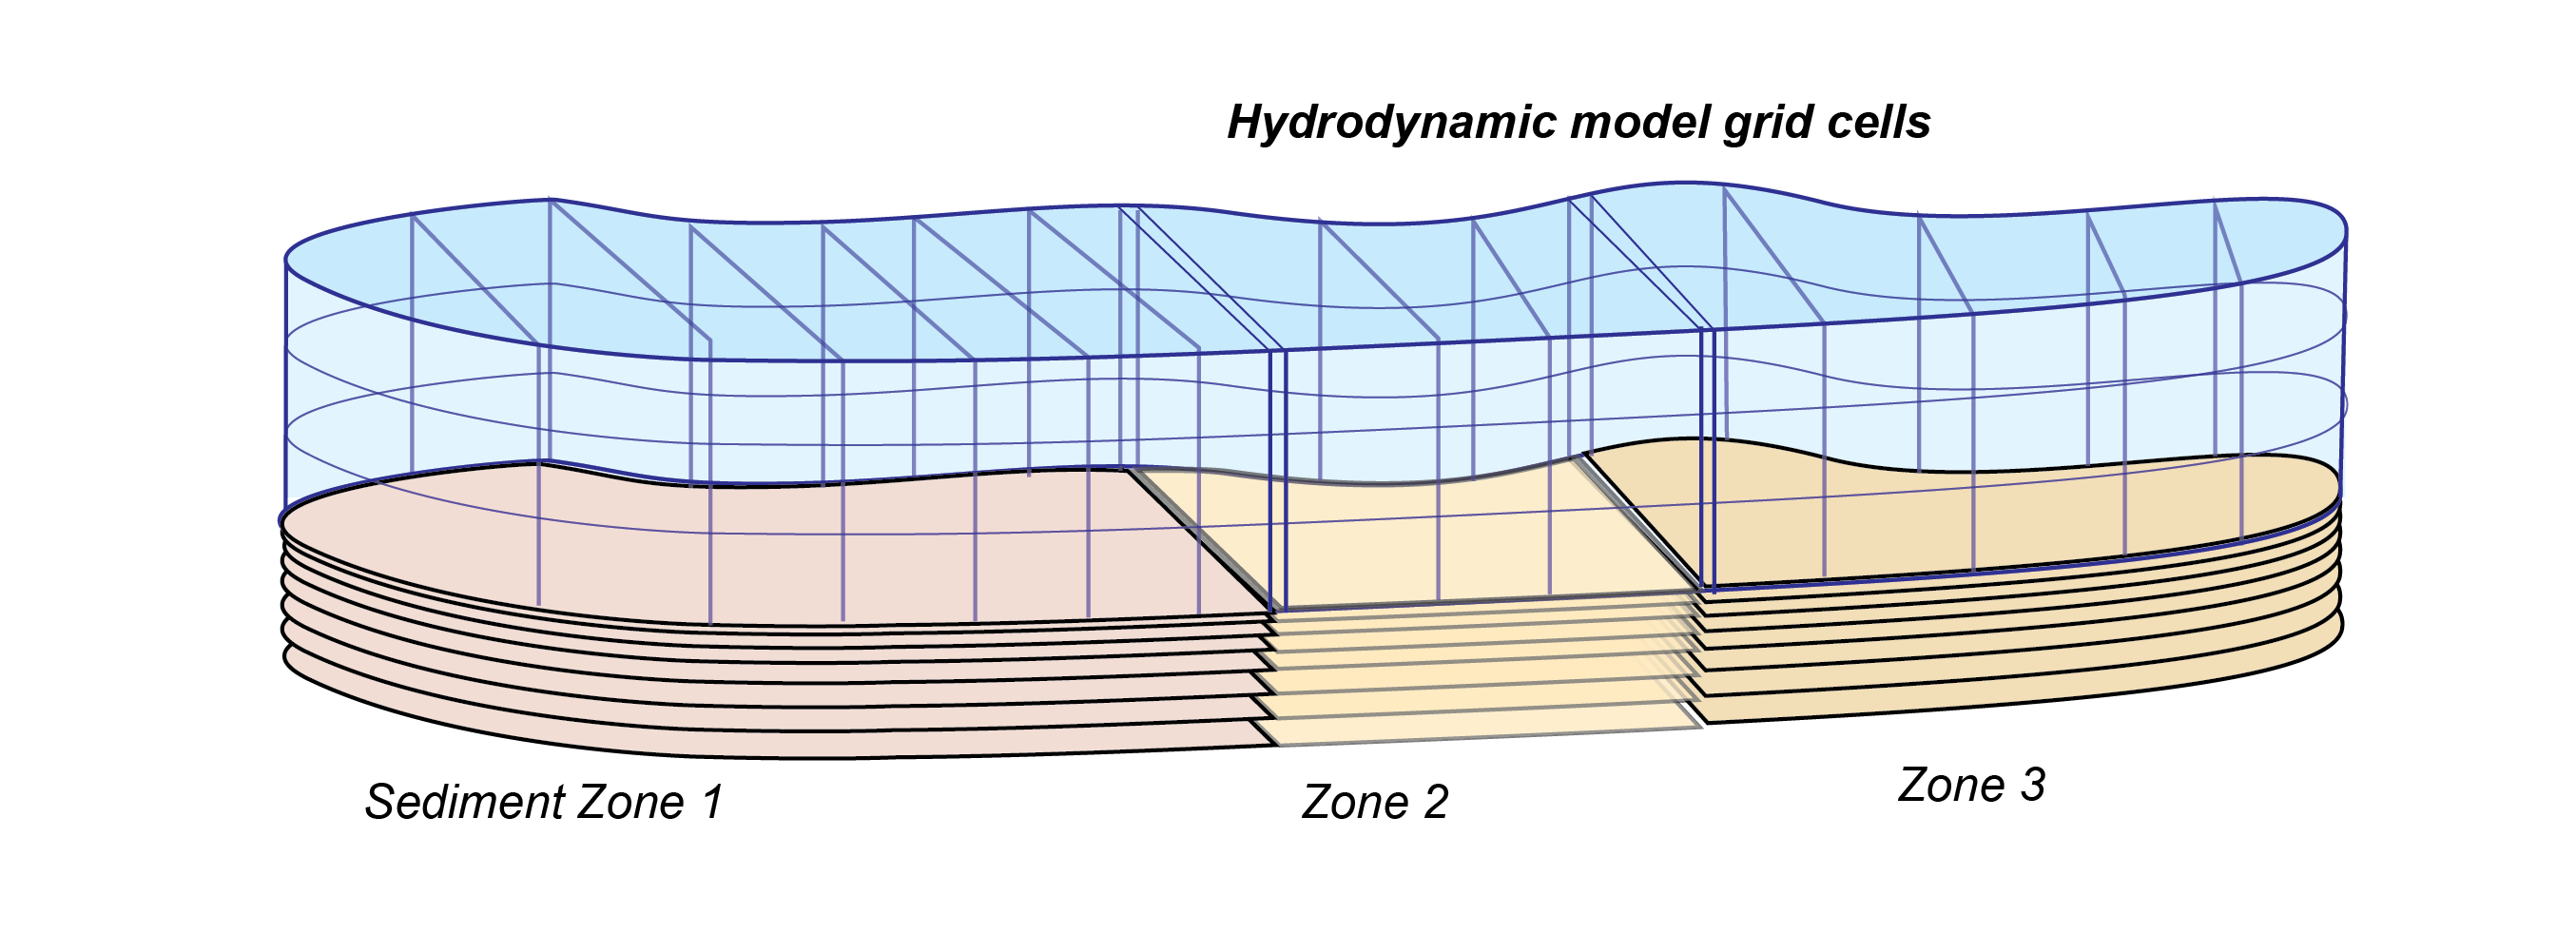 Schematic depicting sediment zone numerical approach, for a 3D hydrodynamic mesh.